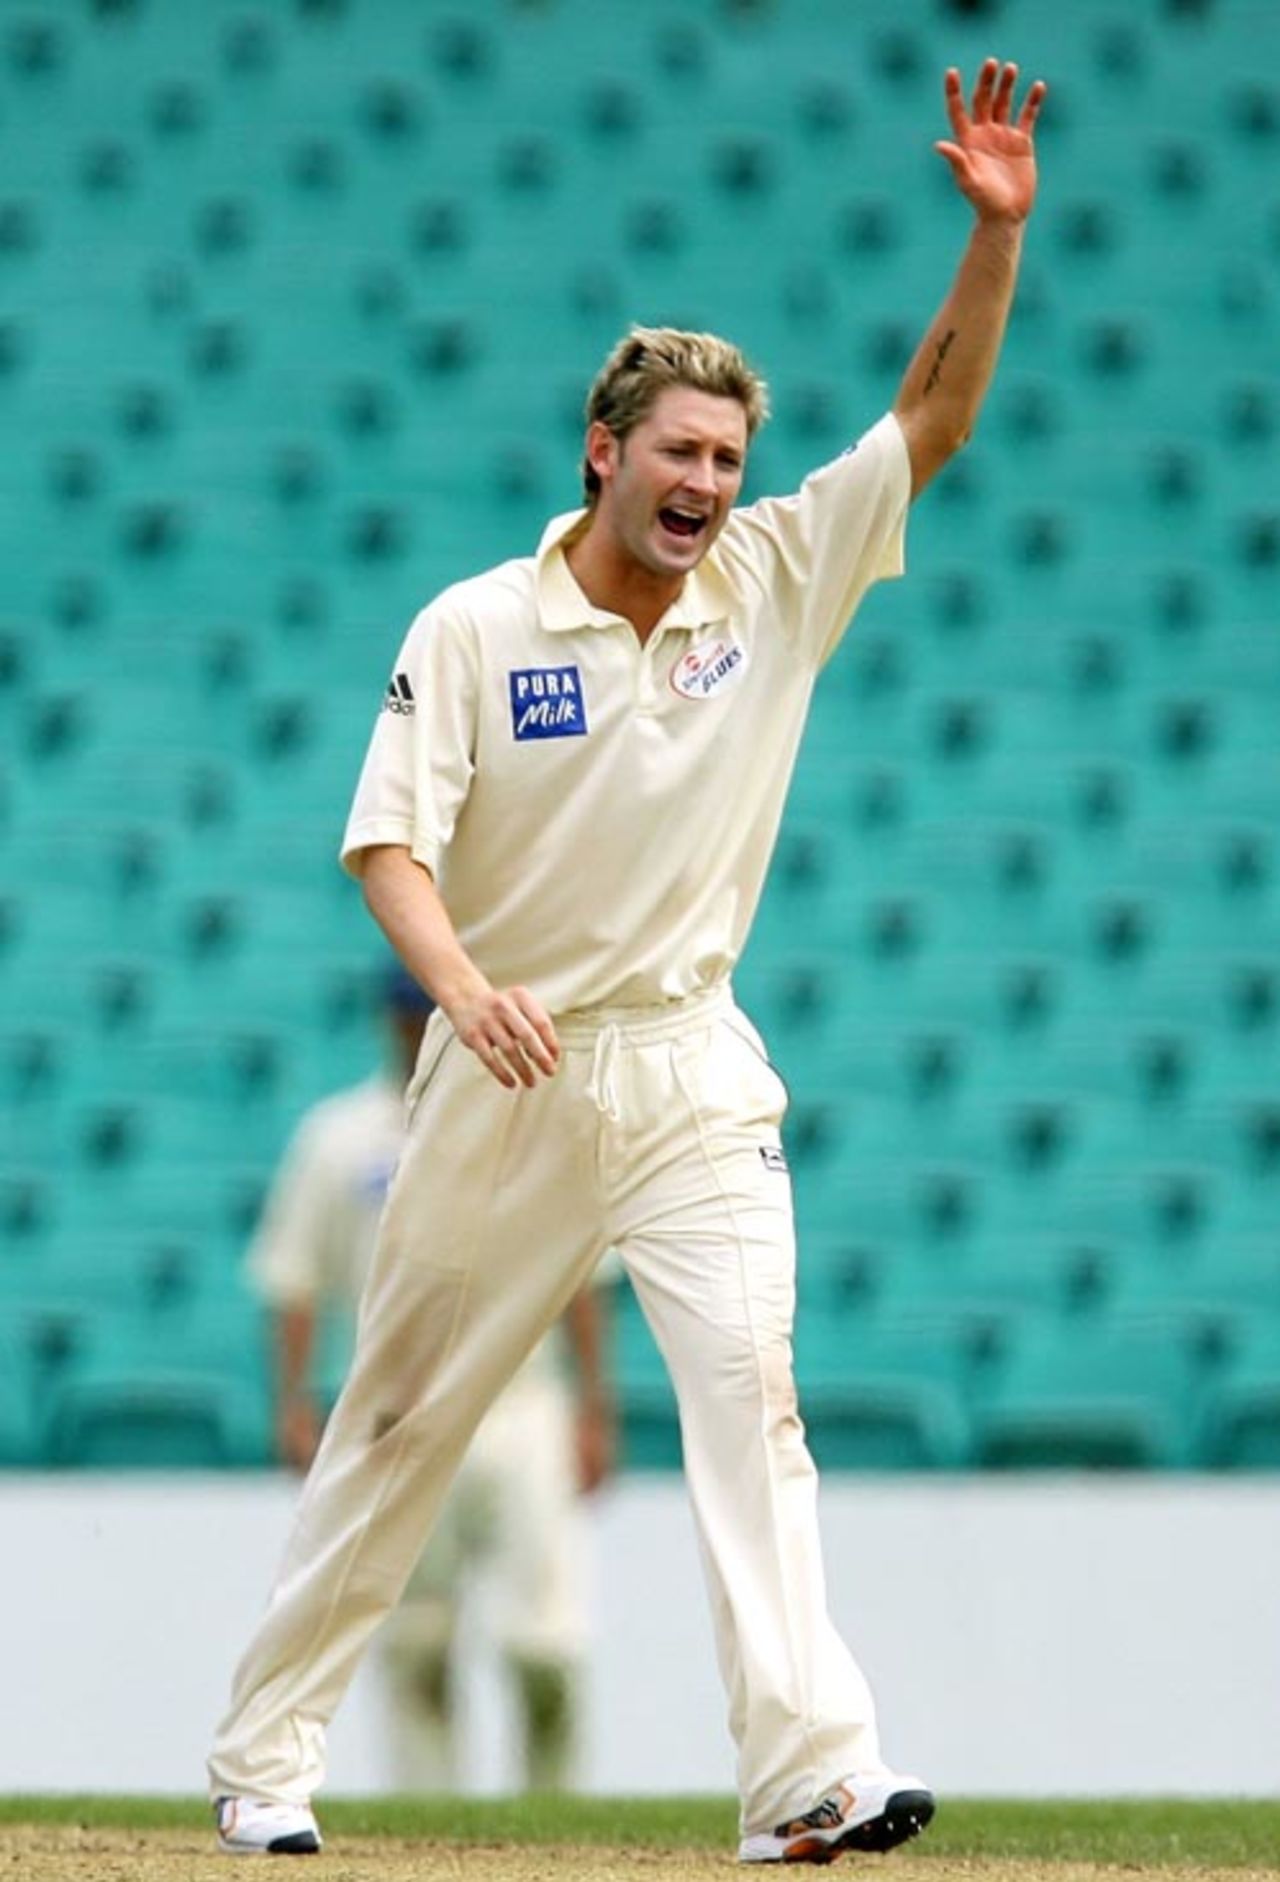 Michael Clarke is elated after dismissing Mitchell Johnson, New South Wales v Queensland, Pura Cup, Sydney, 2nd day, October 27, 2007